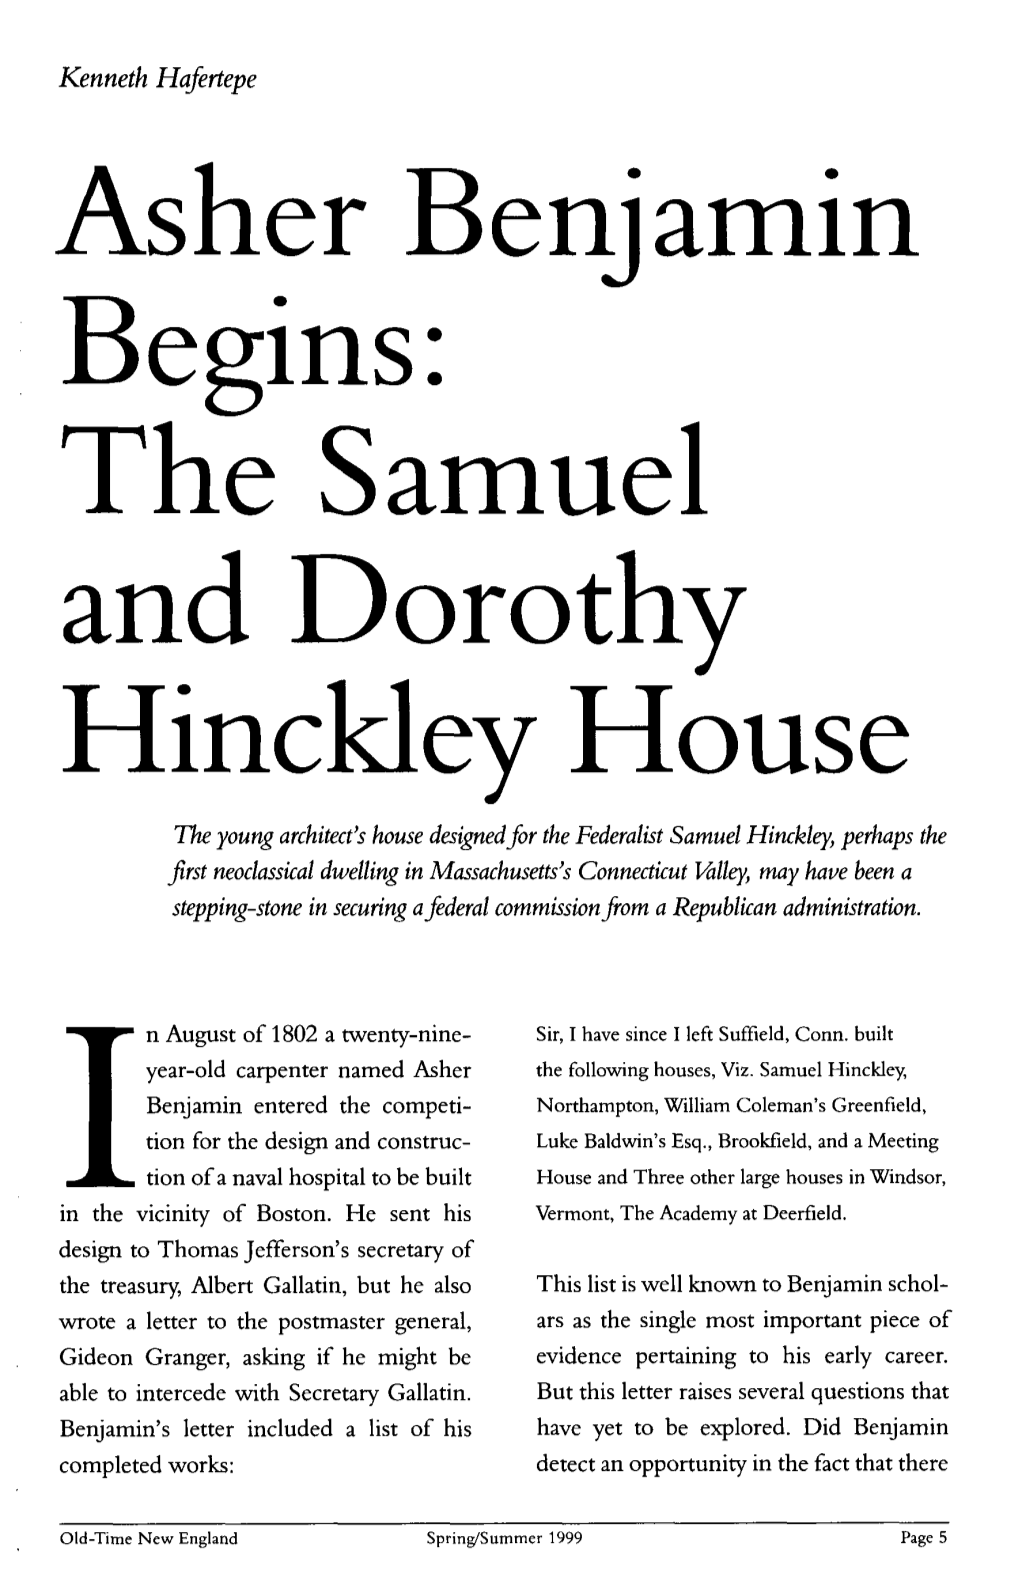 Asher Benjamin Begins: the Samuel and Dorothy Hinddey House